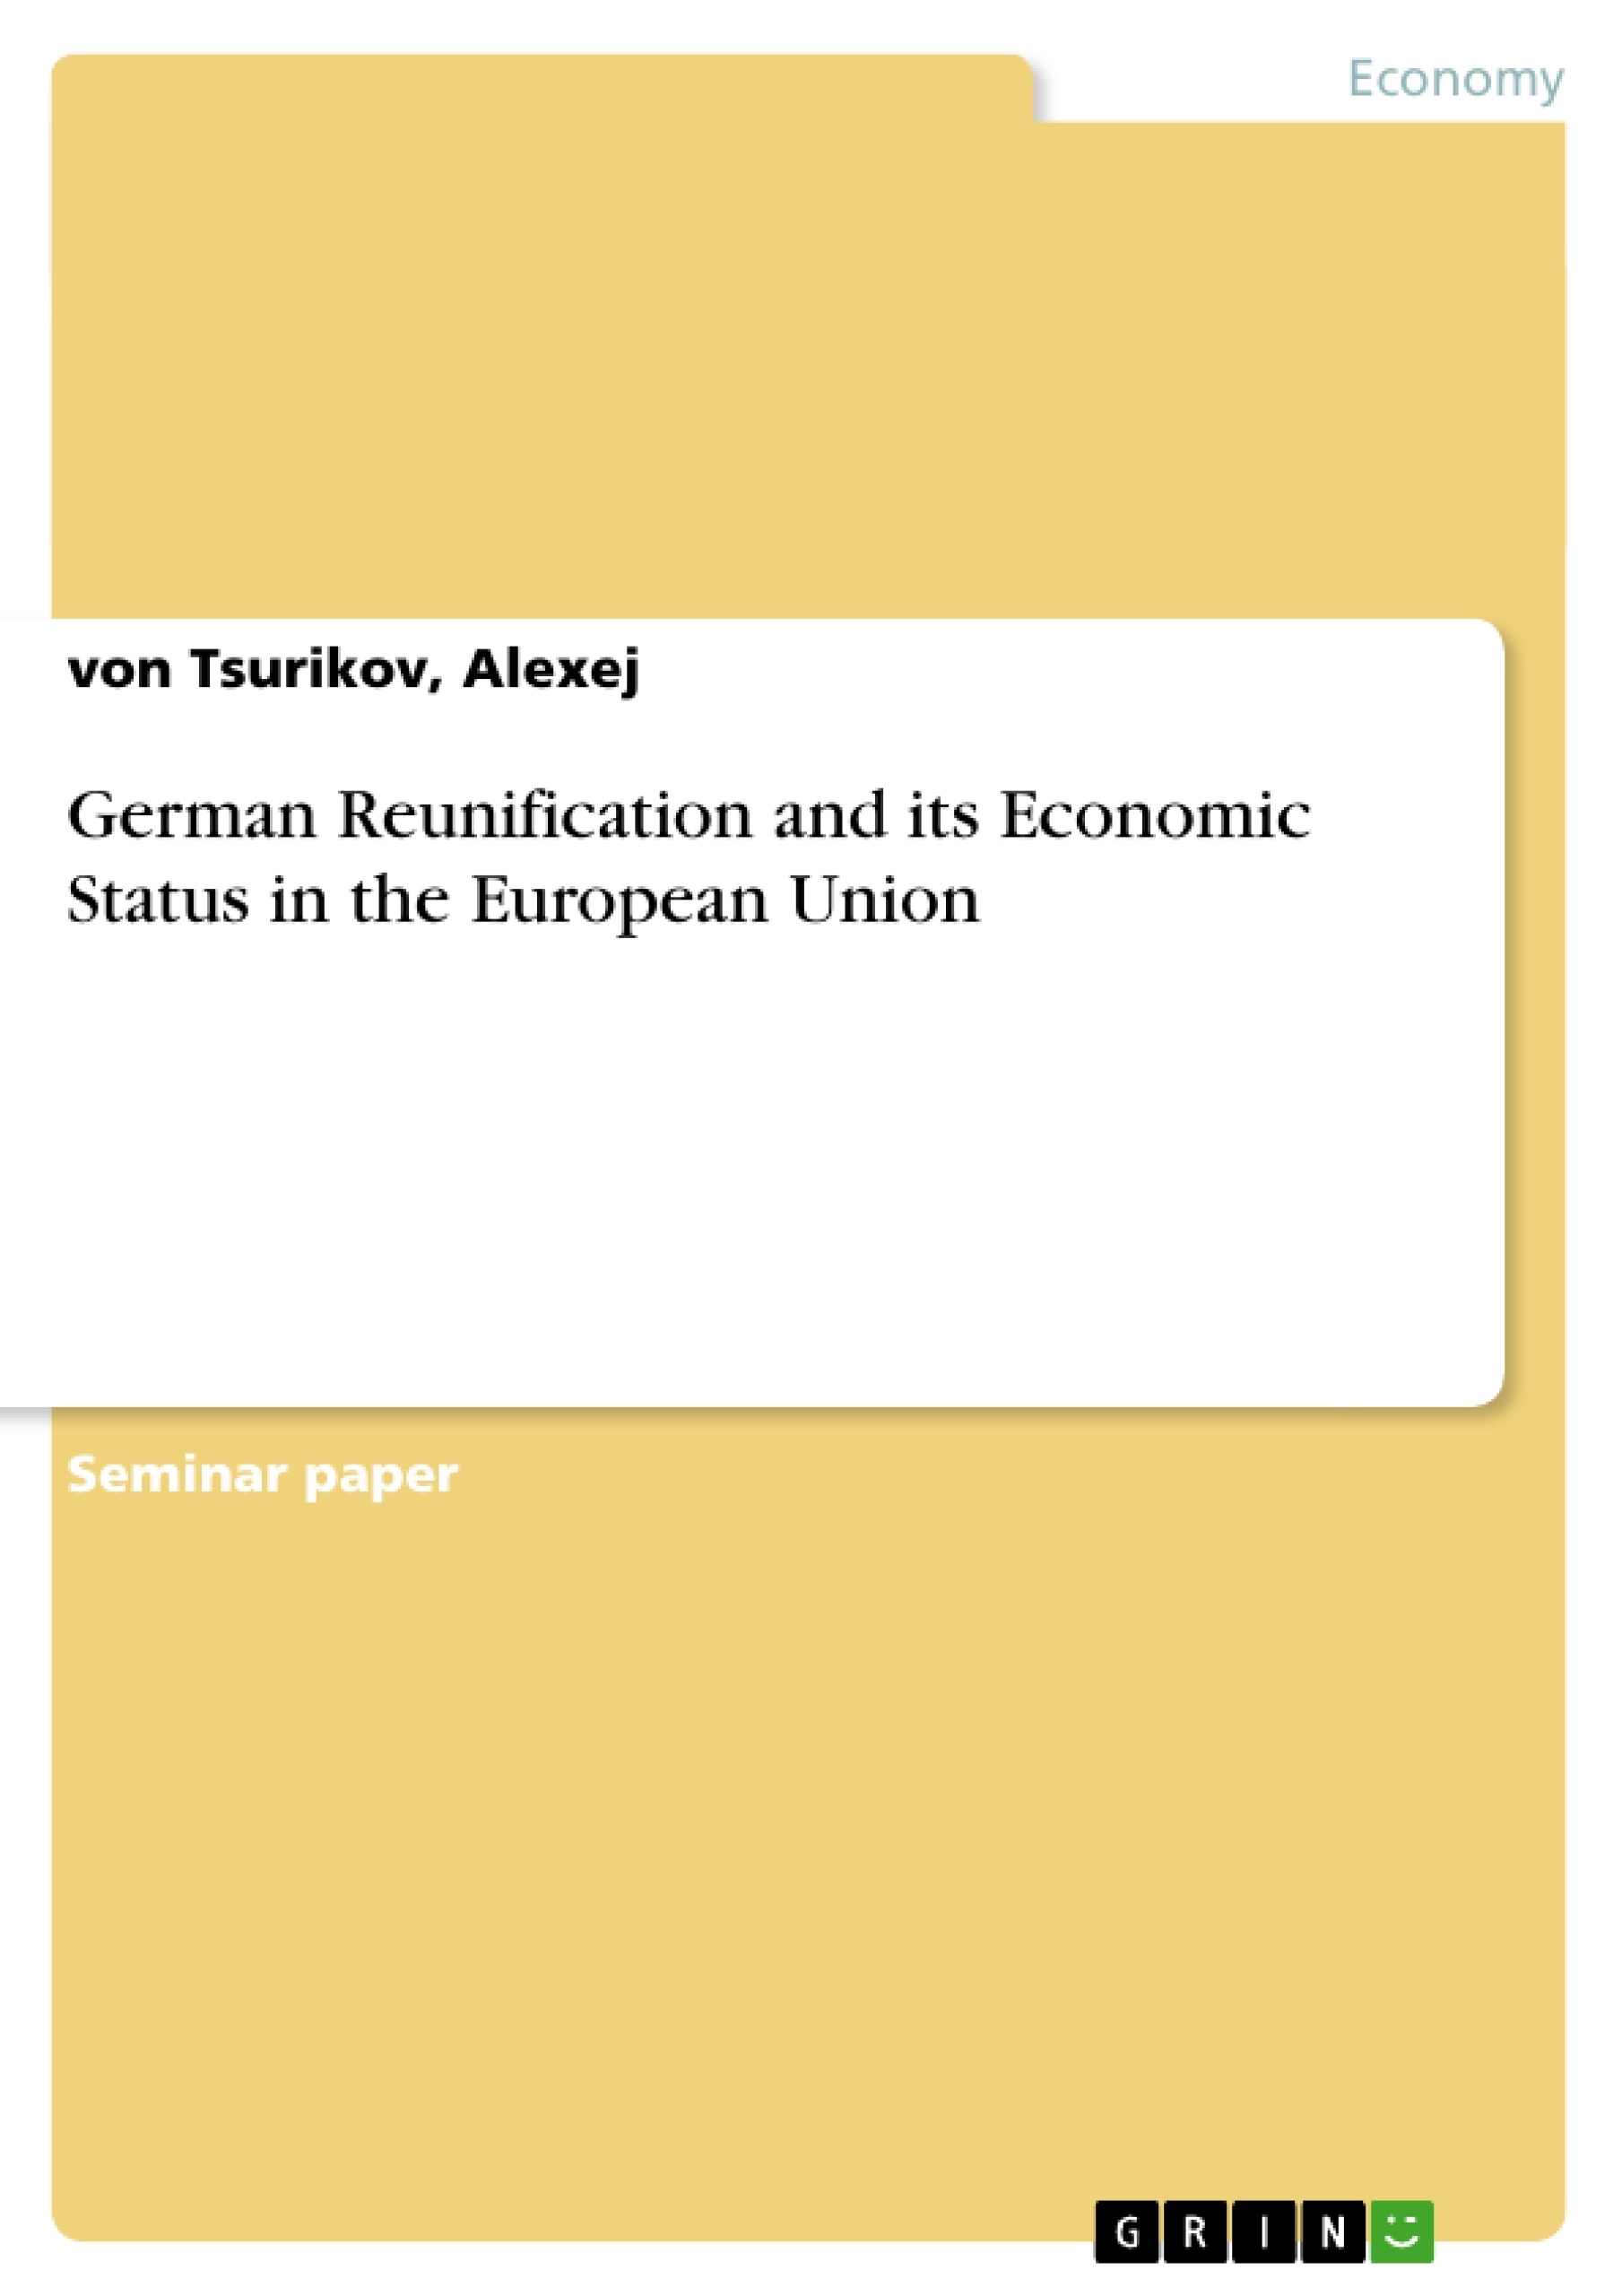 Titre: German Reunification and its Economic Status in the European Union